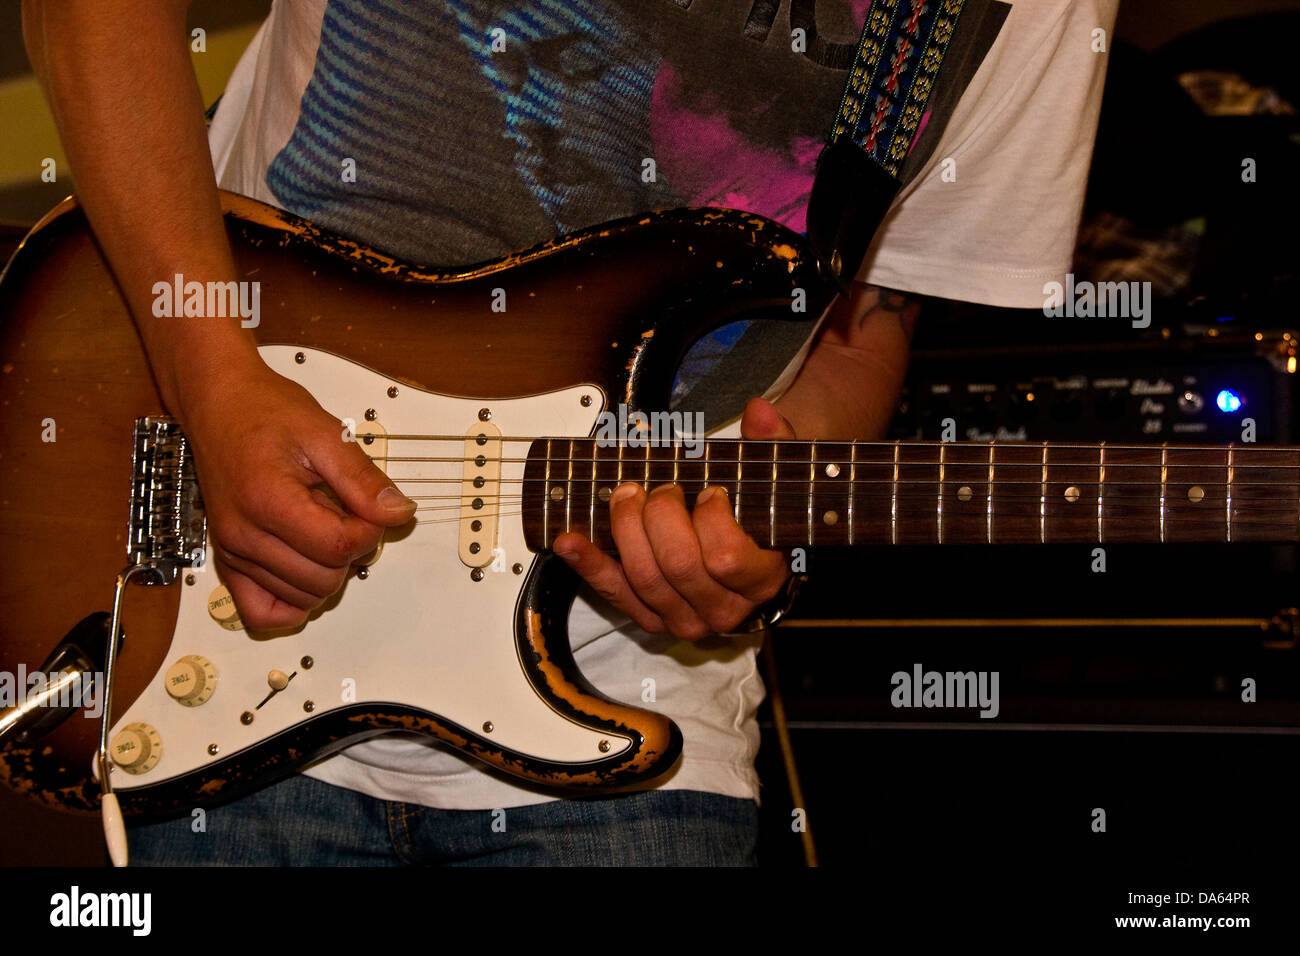 Lee Wharton of The After Hours Blues Band bending the strings of a Fender Stratocaster during a live performance in Dundee, UK Stock Photo